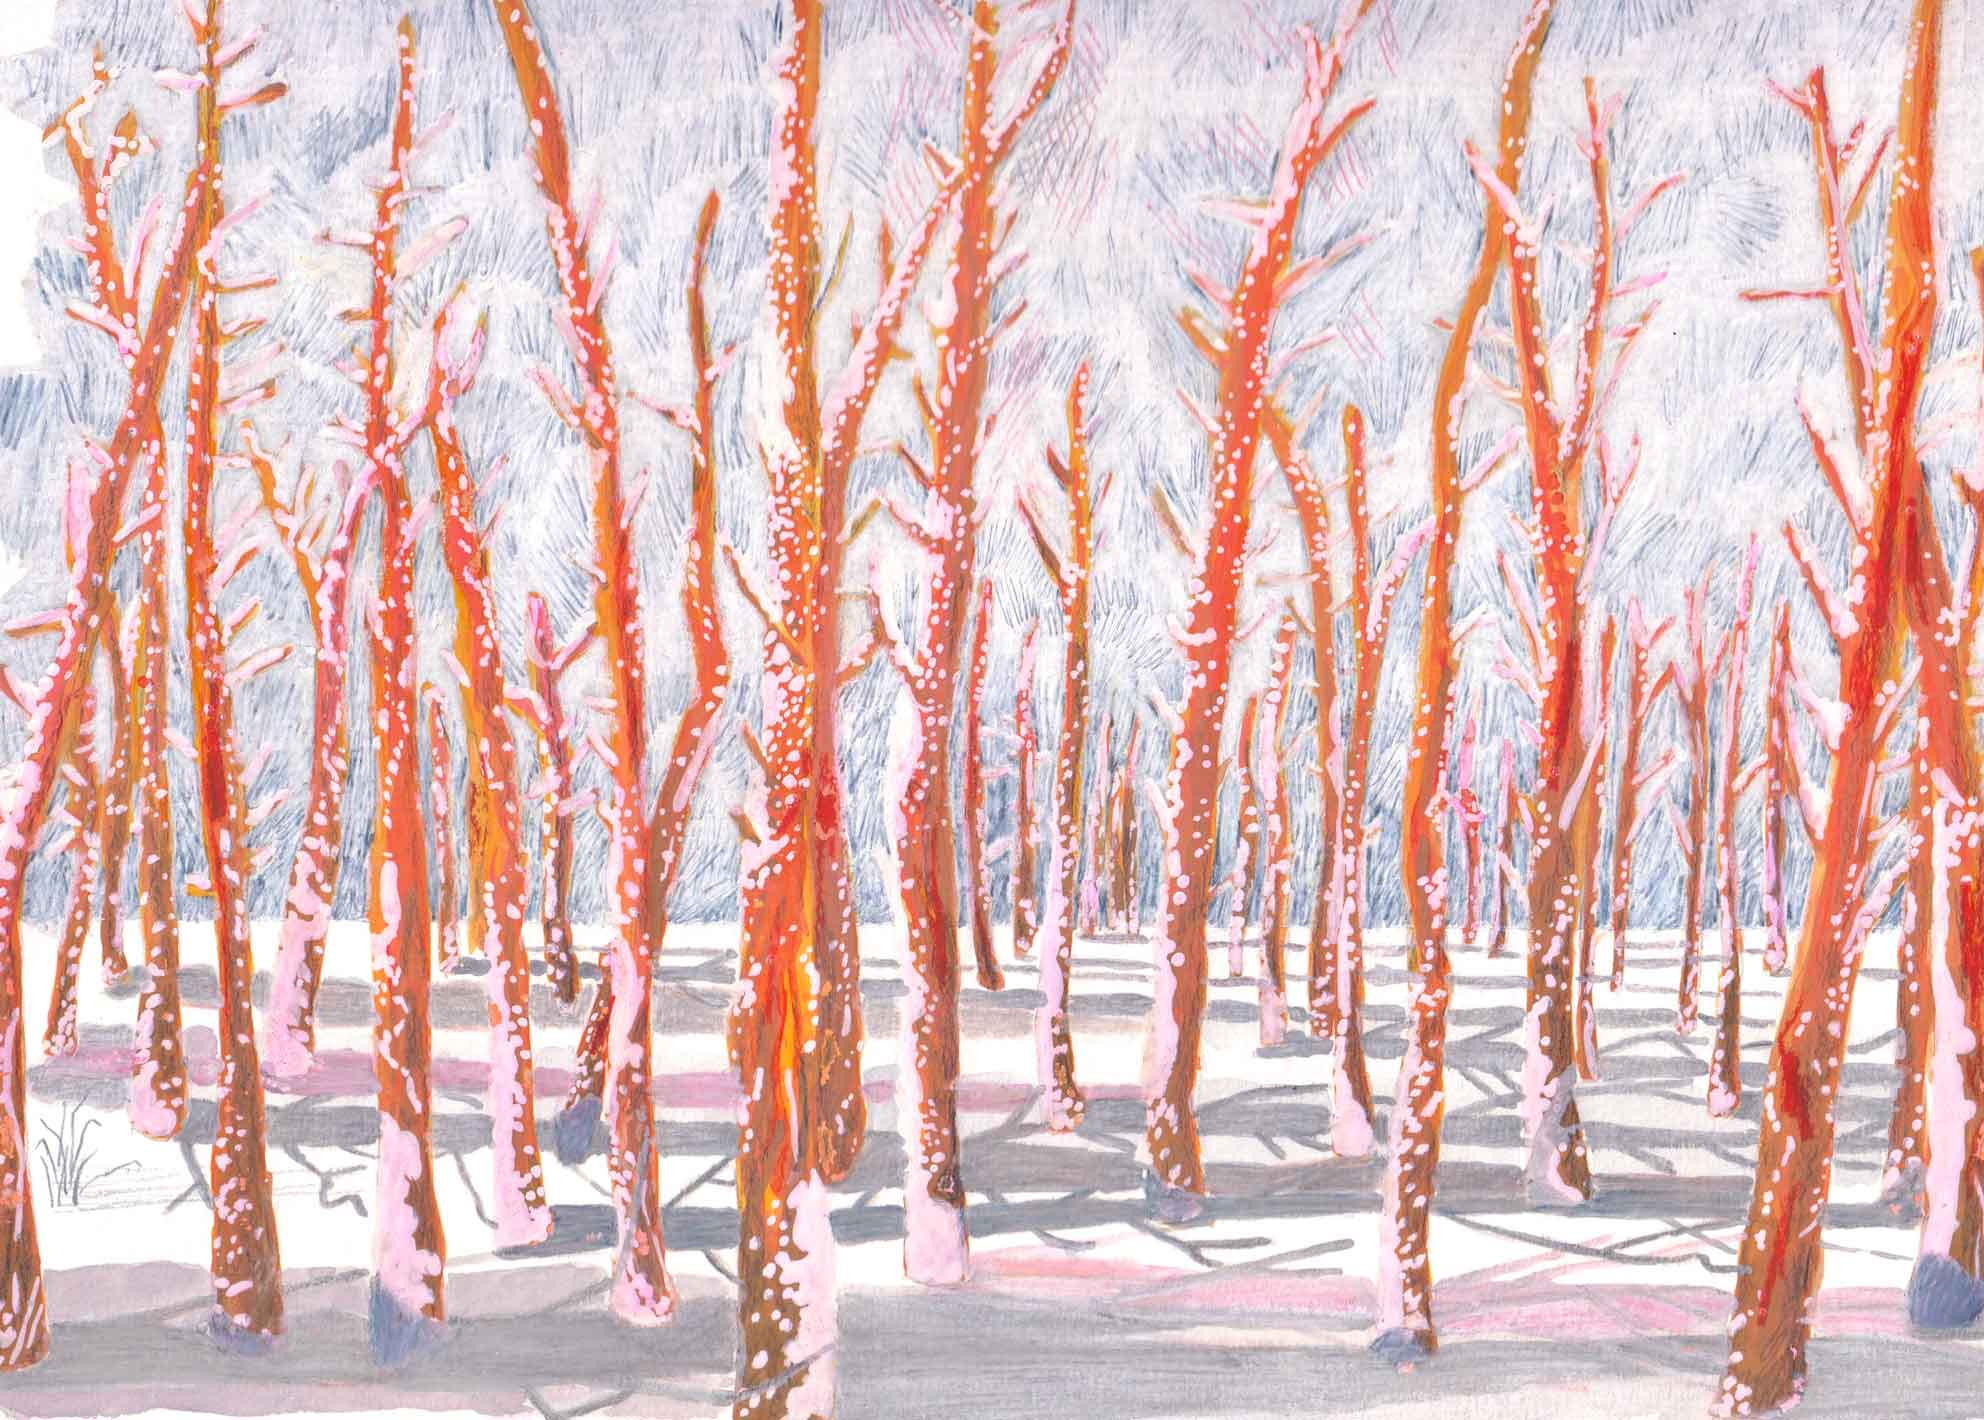 A drawing of a forest in the snow. The trees are orange and cast long shadows on the snow.